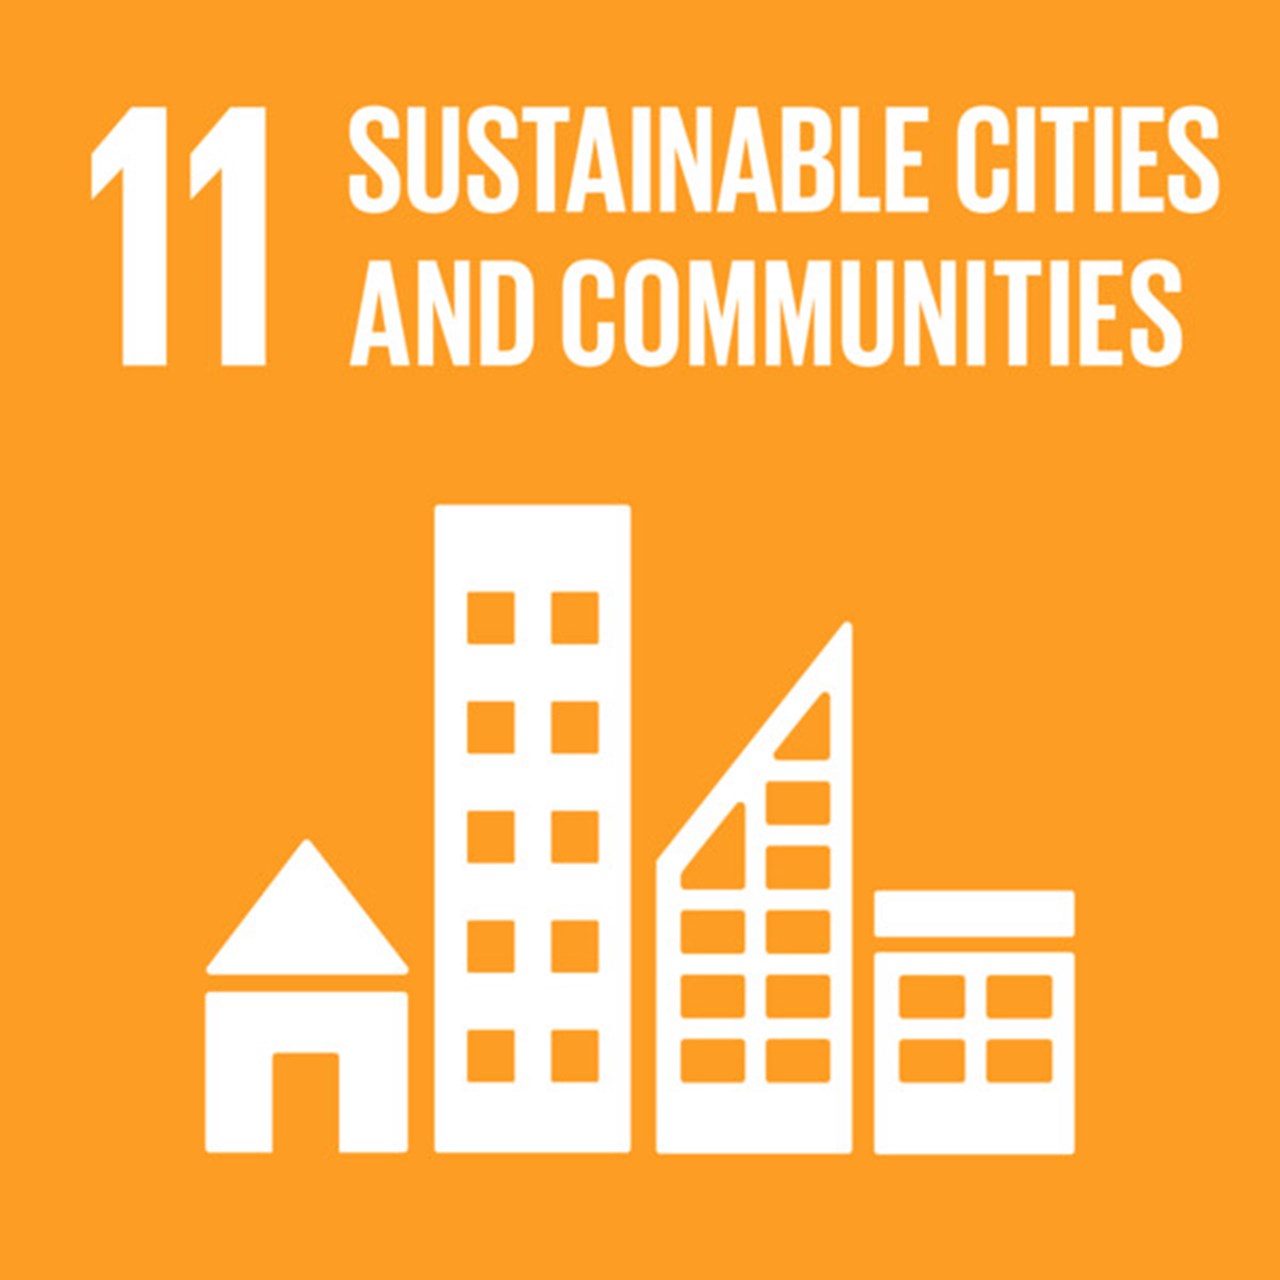 The Global Goals, Goal 11 - Sustainable Cities and Communities